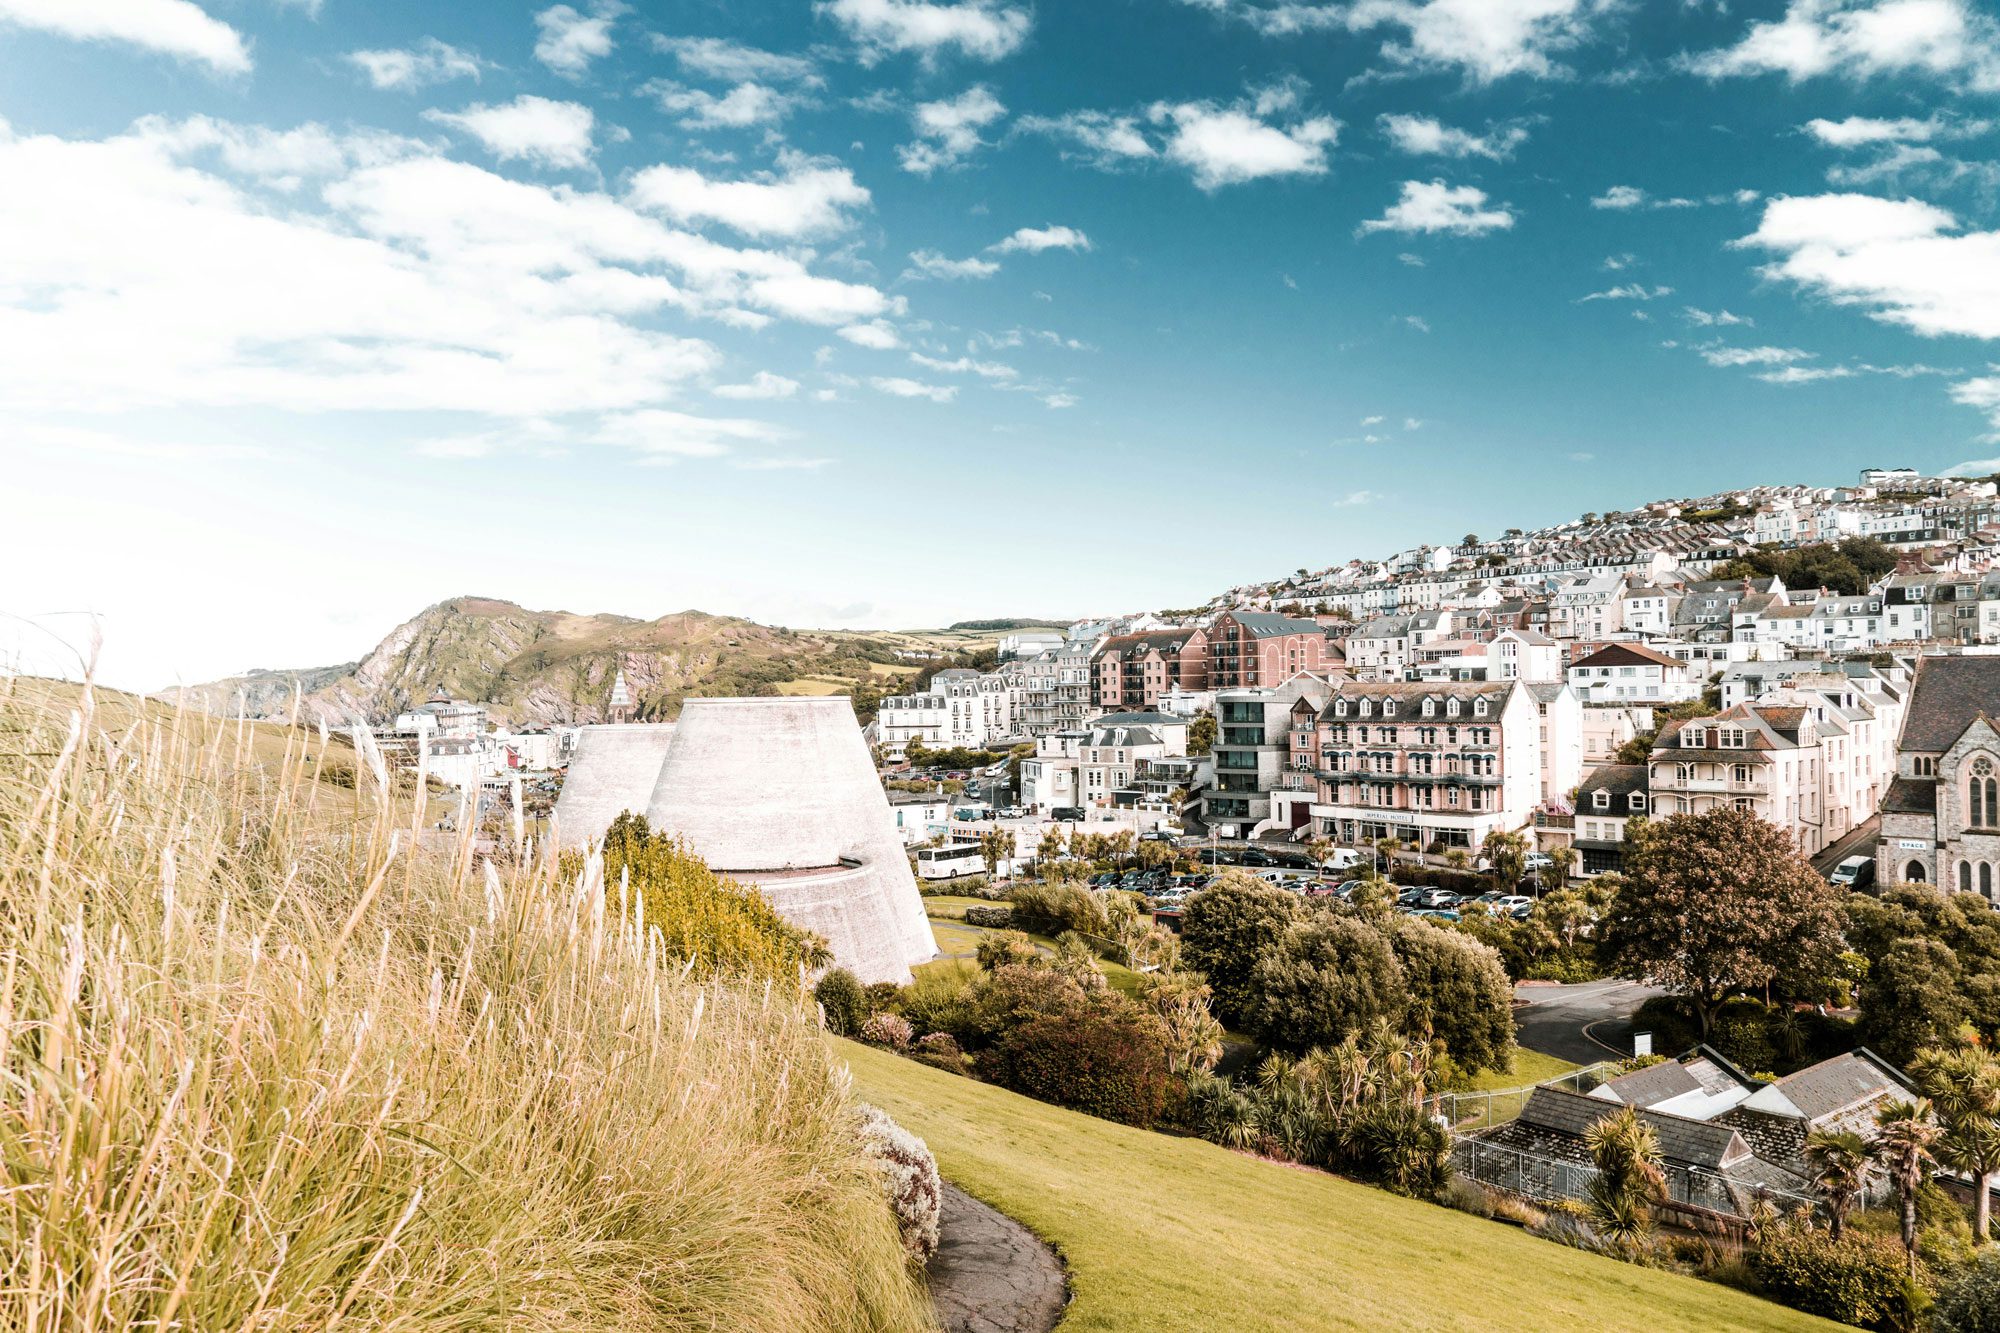 A photo of the Landmark Theatre in Ilfracombe nestled amongst the surrounding landscape